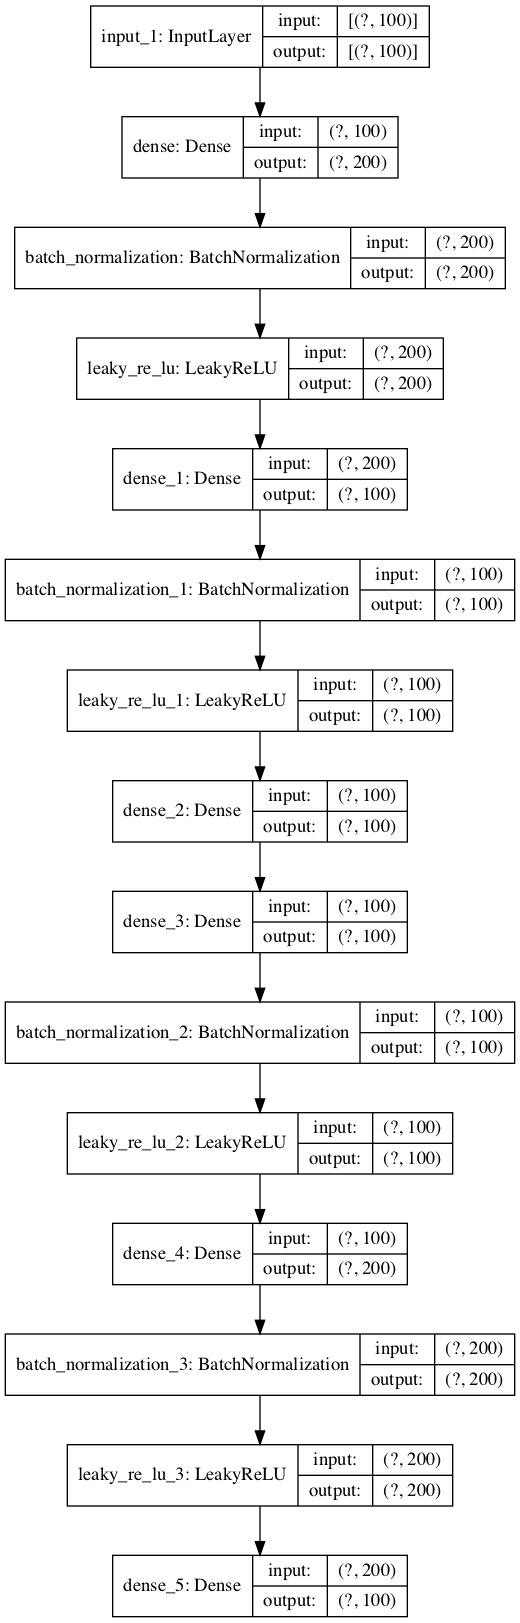 Plot of Autoencoder Model for Classification With No Compression